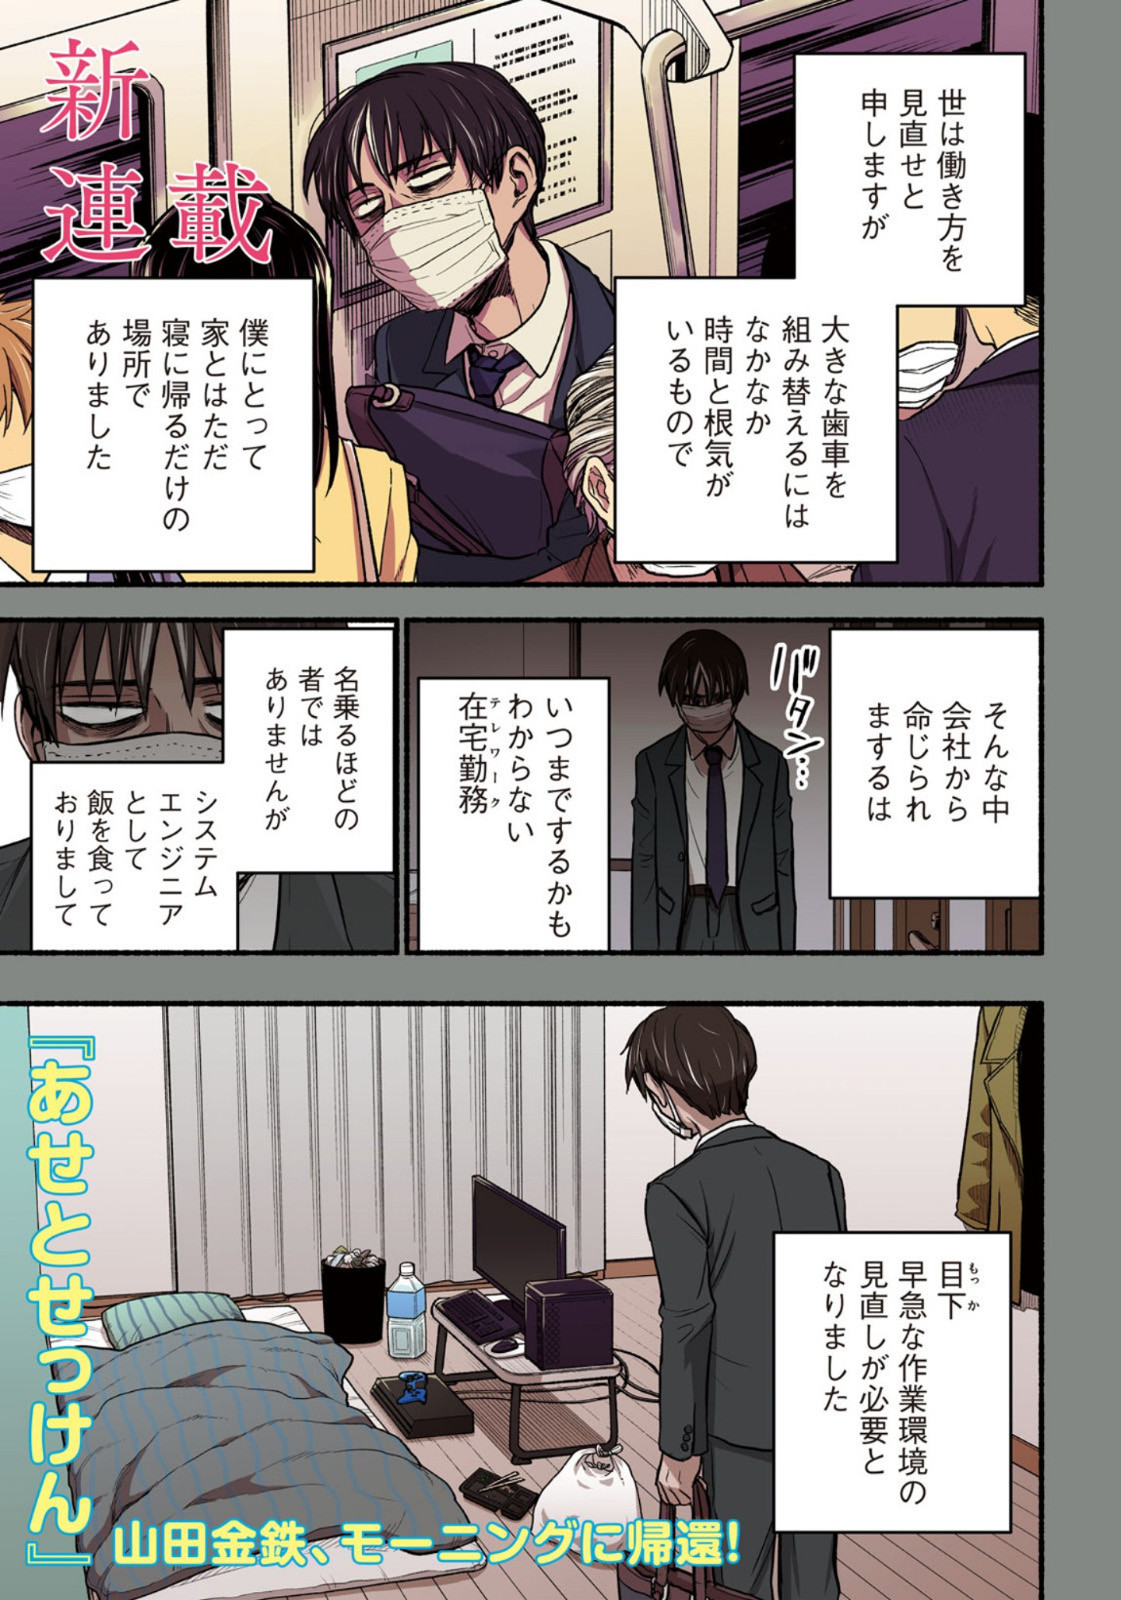 Weekly Morning - 週刊モーニング - Chapter 2022-49 - Page 3